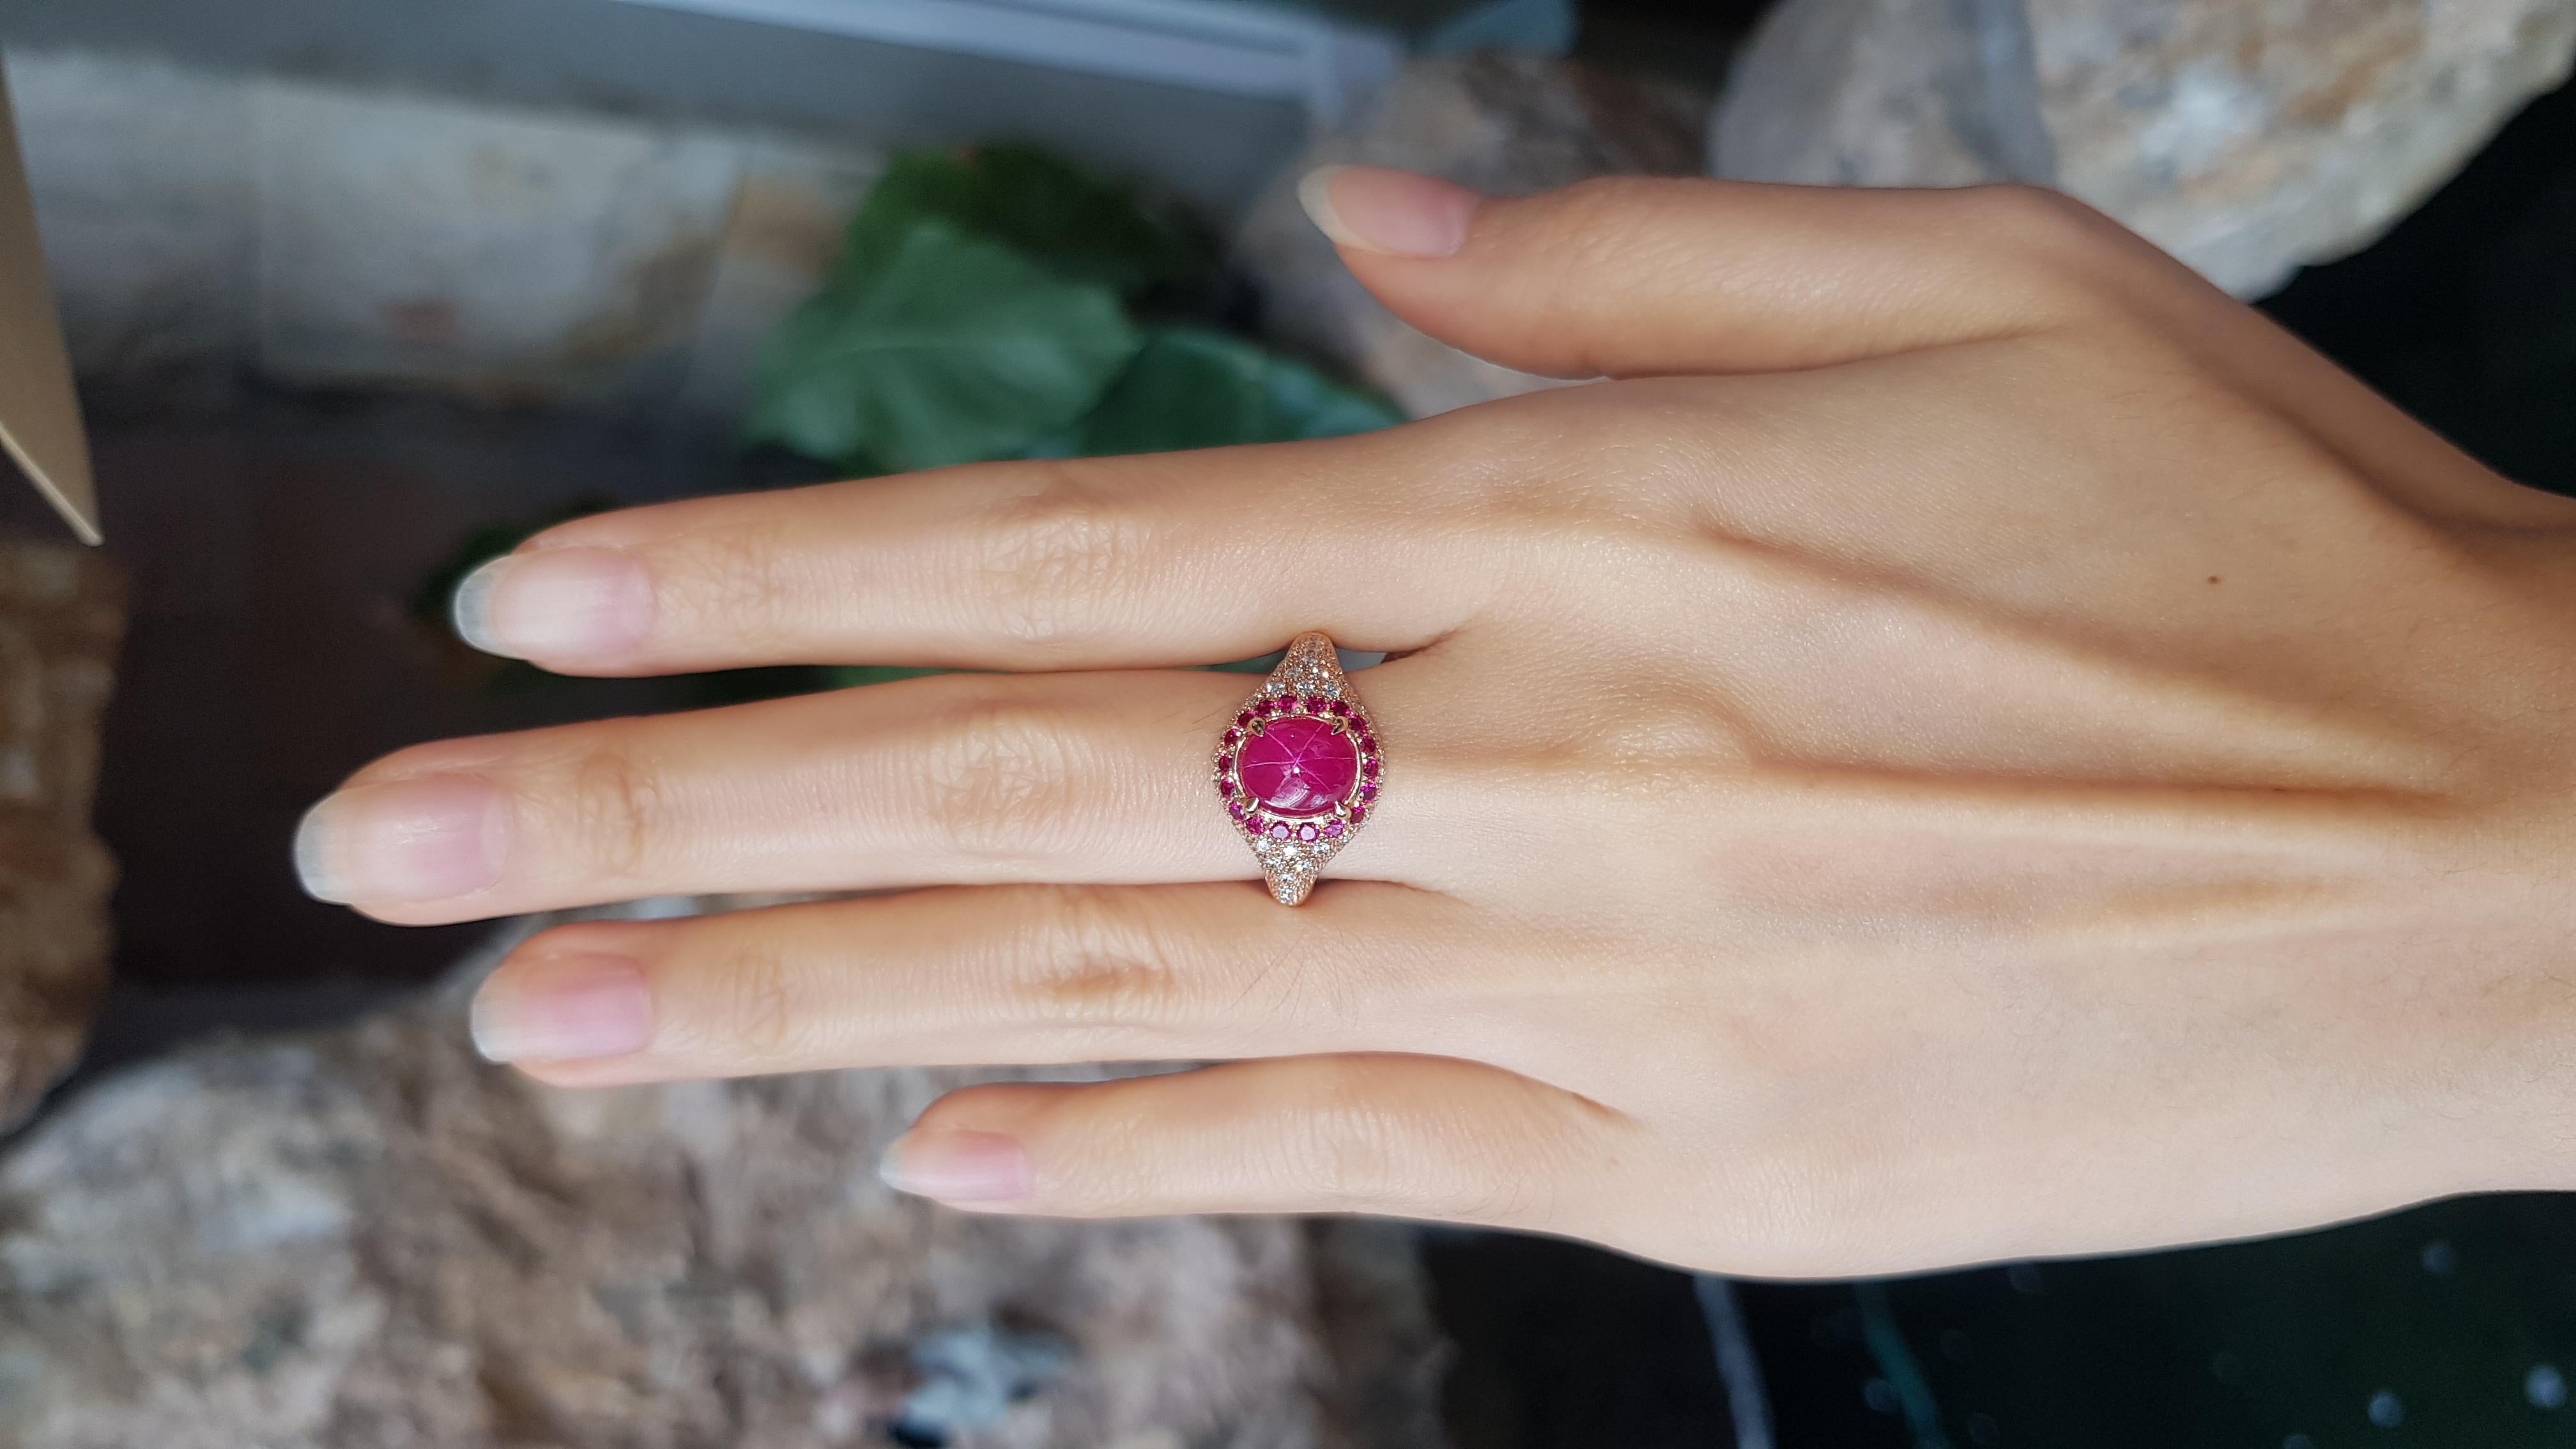 Star Ruby 2.58 carats, Ruby 0.33 carat and Diamond 0.50 carat Ring set in 18 Karat Rose Gold Settings

Width:  2.0 cm 
Length: 1.2 cm
Ring Size: 54
Total Weight: 6.6 grams



